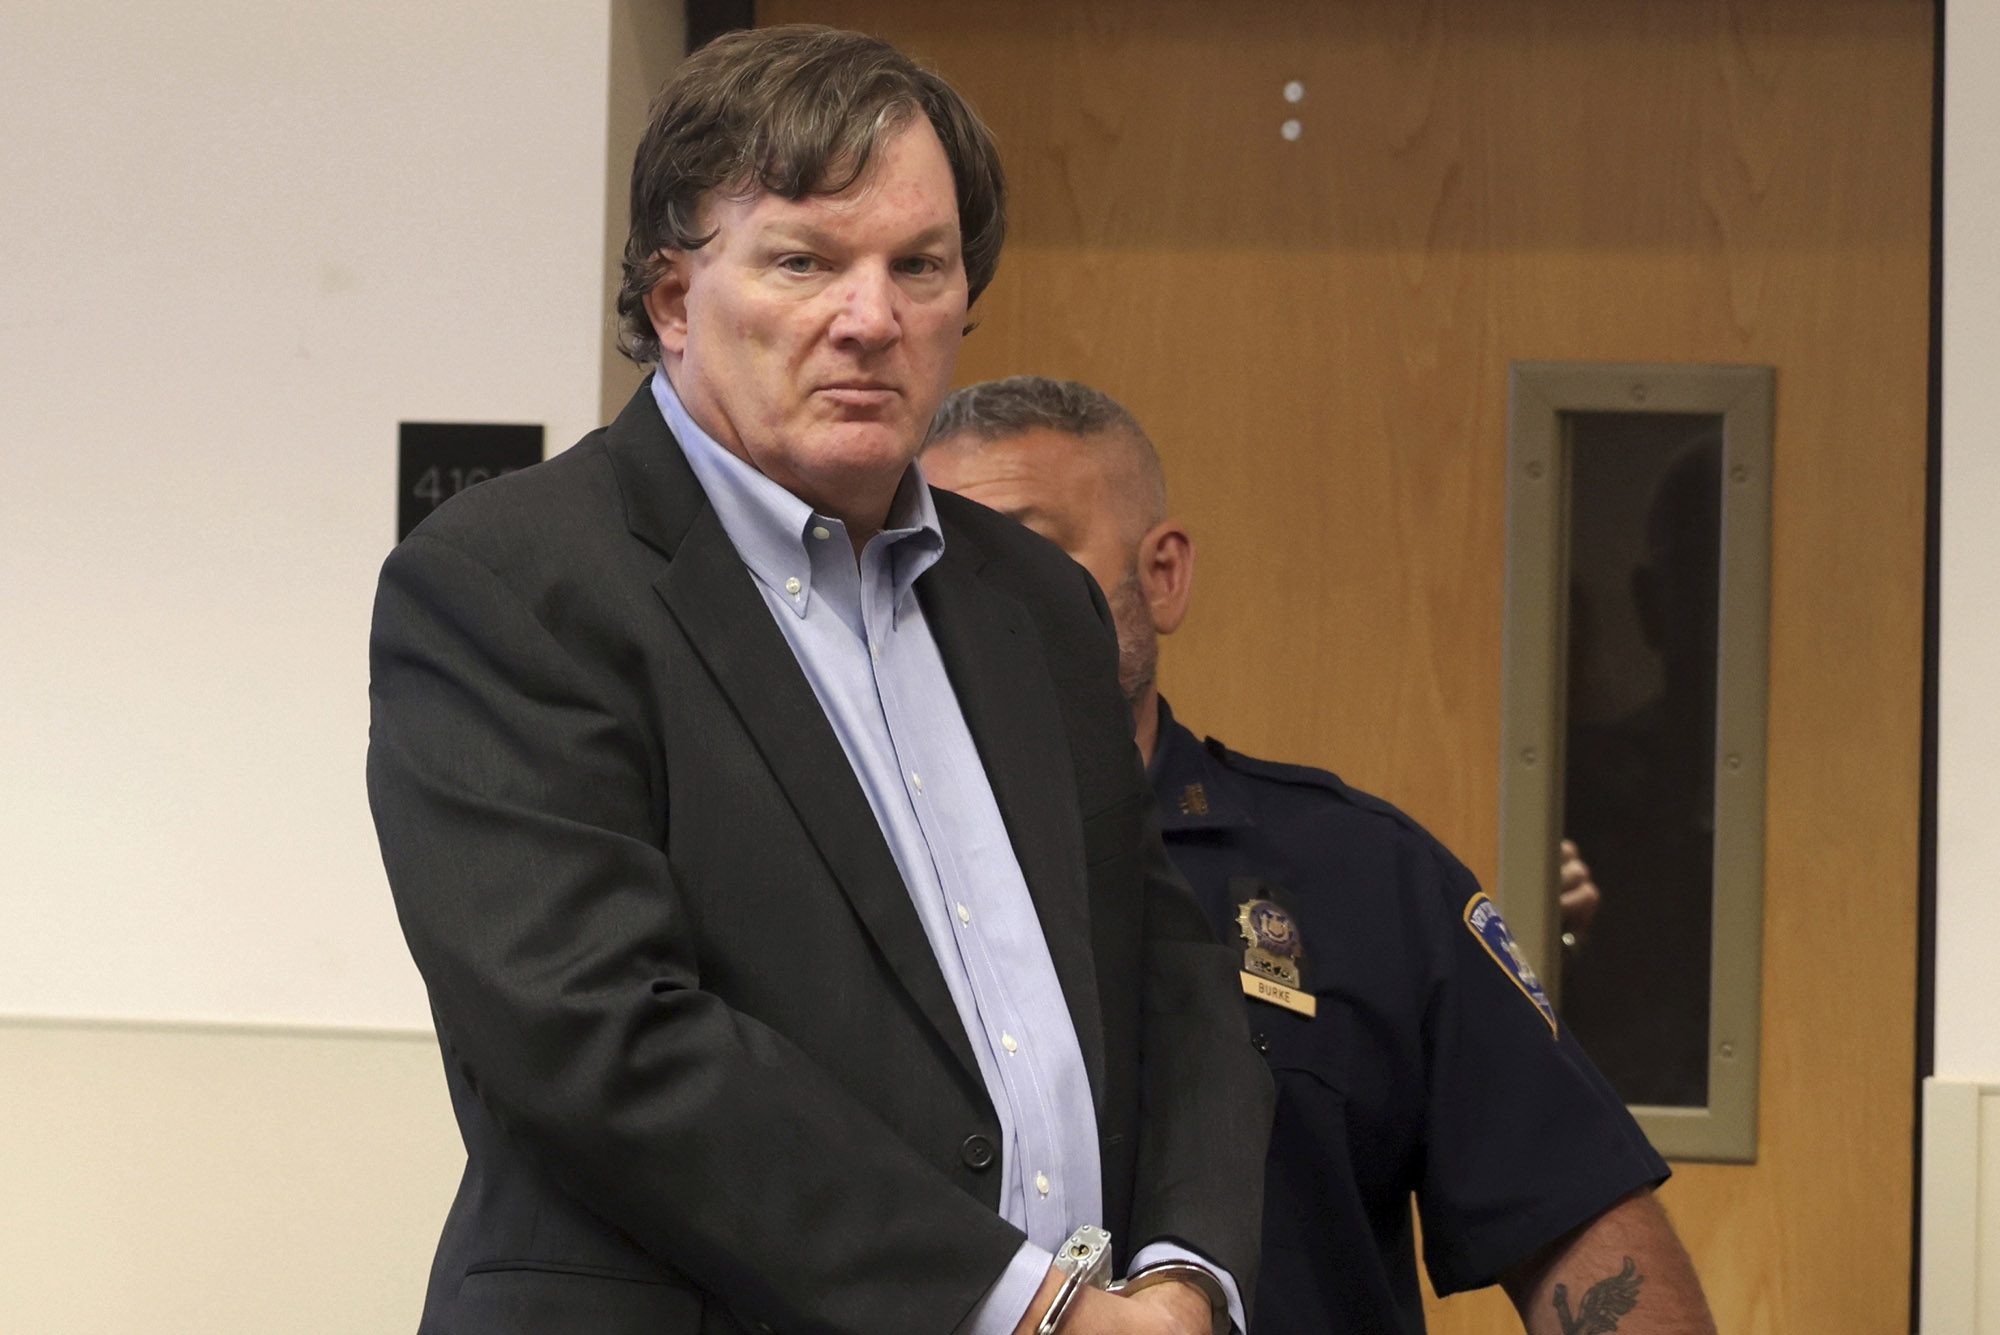 Photo:Rex A. Heuermann, the architect accused of murdering at least three women near Long Island’s Gilgo Beach, appears before Judge Timothy P. Mazzei in Suffolk County Court. He is a white man wearing a regular suit.